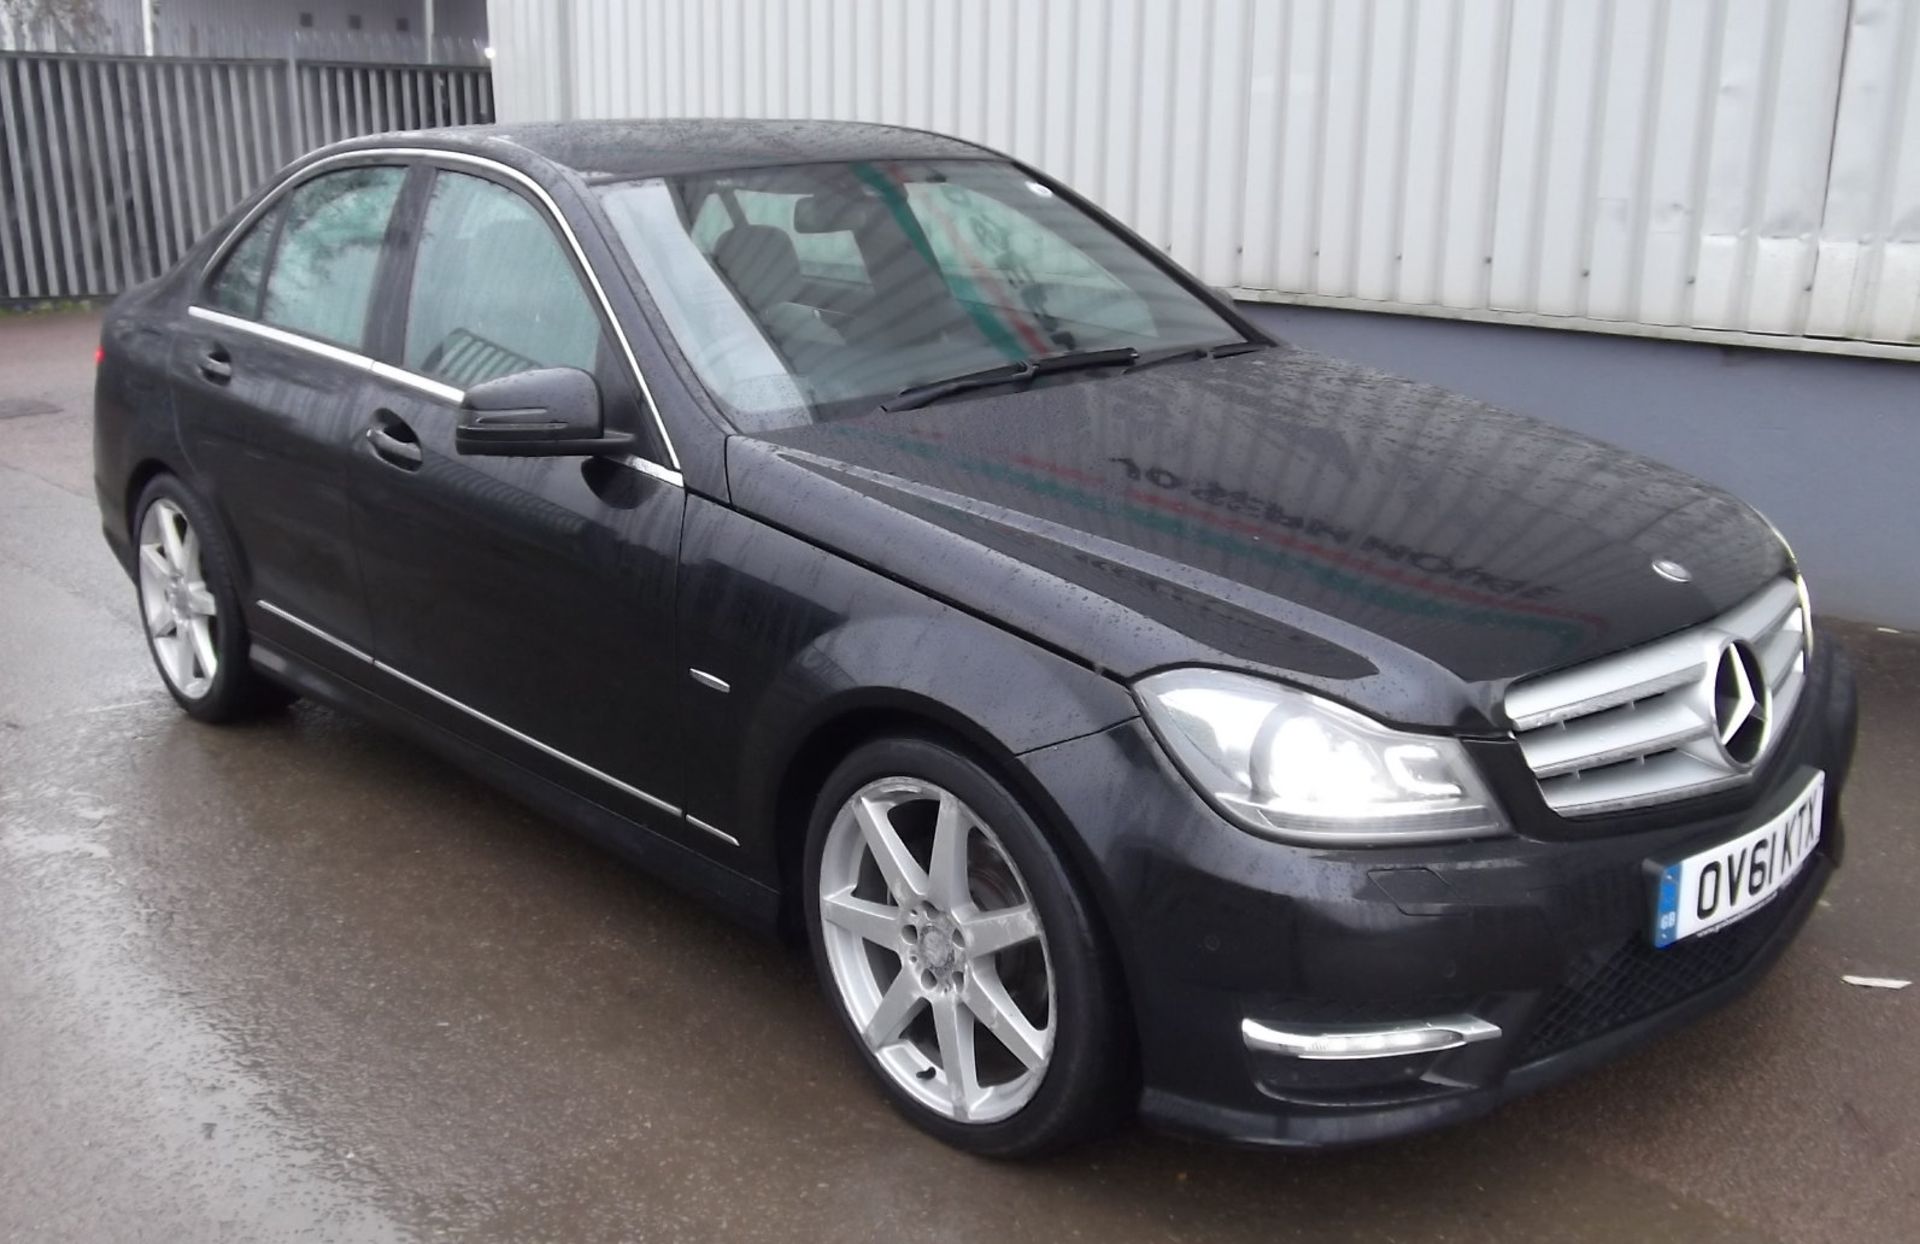 2011 Mercedes C220 CDI BlueEFFICIENCY Sport Edition 125 4dr Auto Saloon - CL505 - NO VAT ON THE HAMM - Image 2 of 21